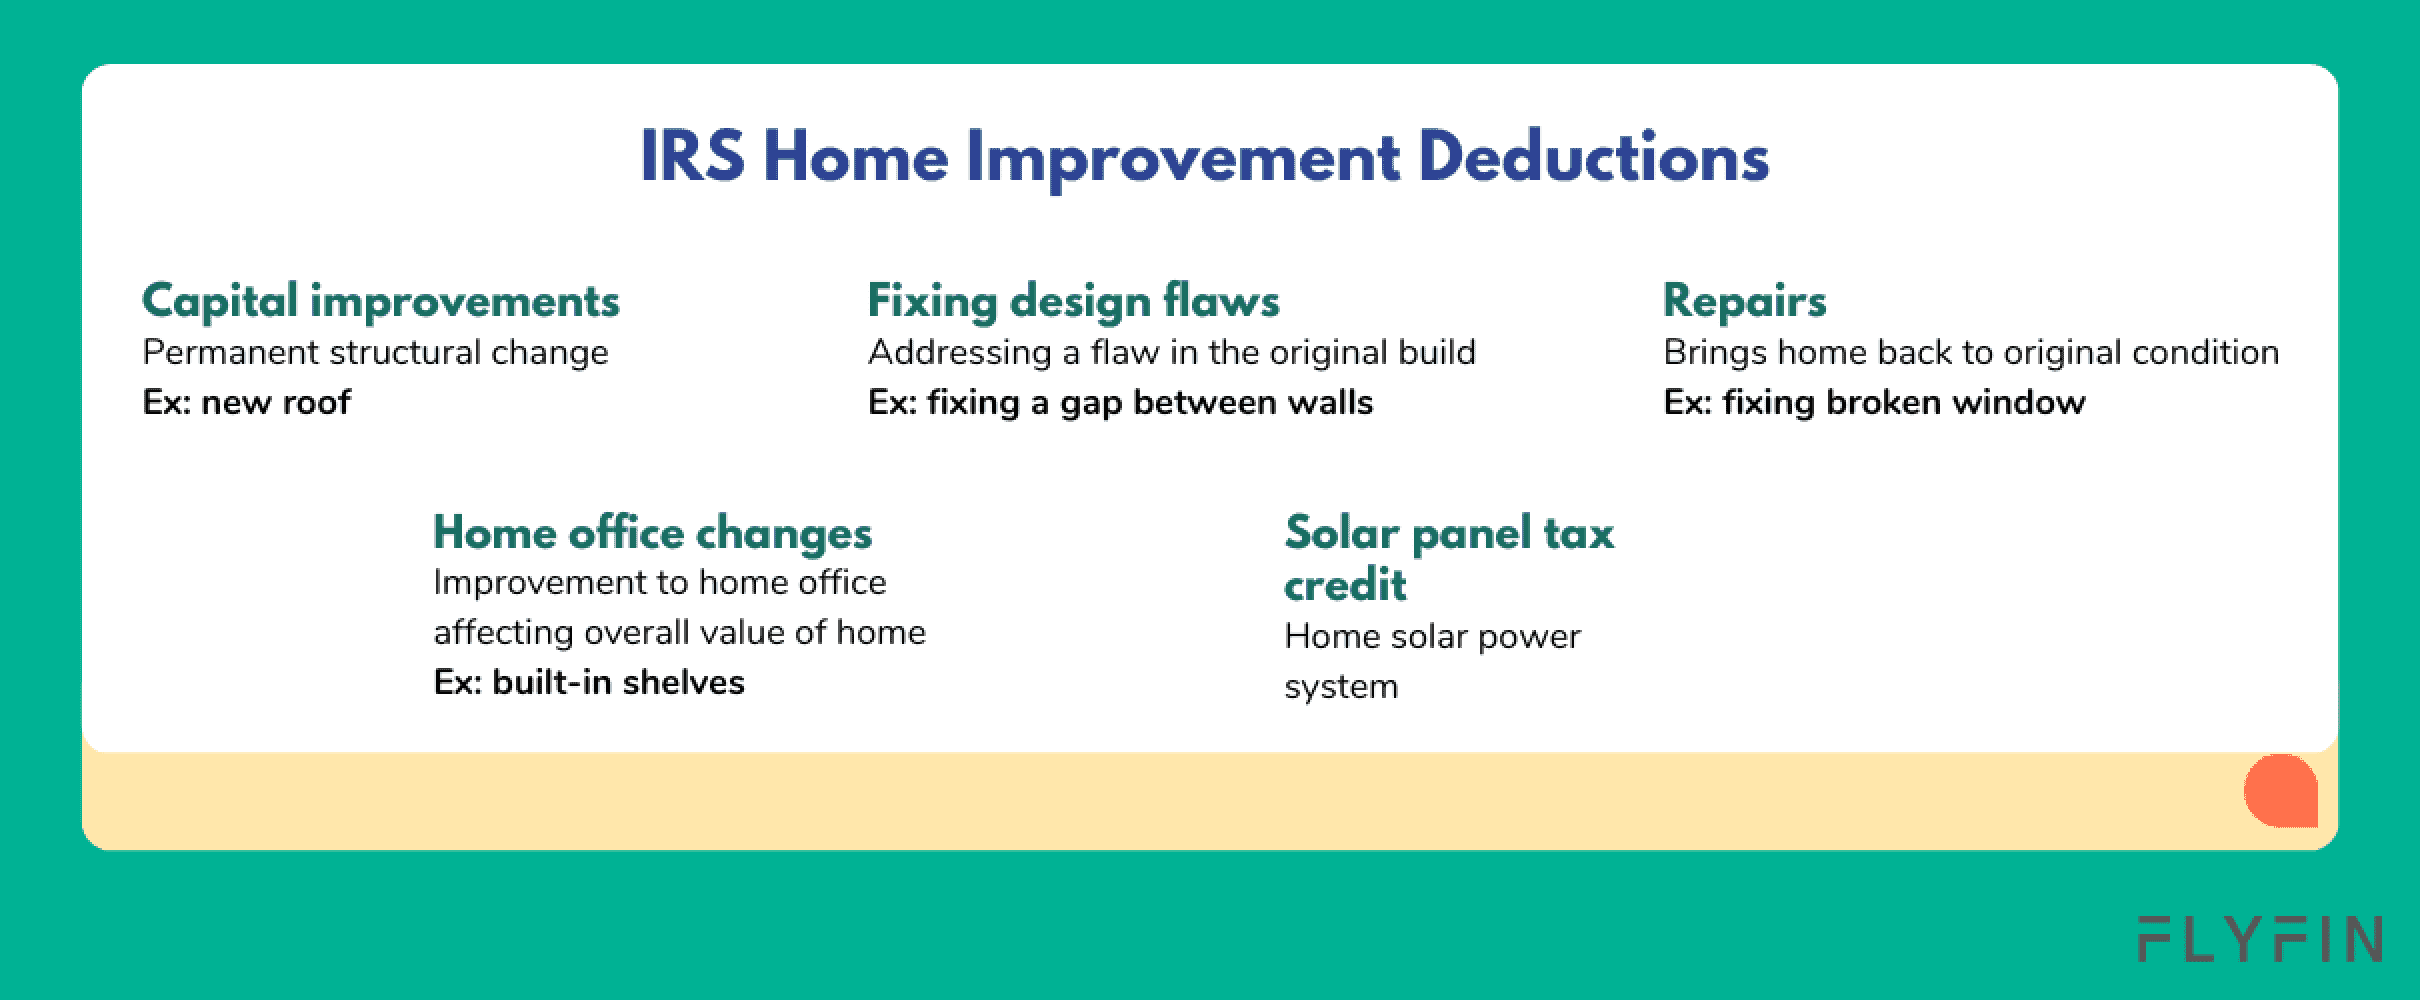 Image describing IRS deductions for home improvements including capital improvements, repairs, fixing design flaws, home office changes, and solar panel tax credit. No mention of self-employed, 1099, freelancer or taxes.